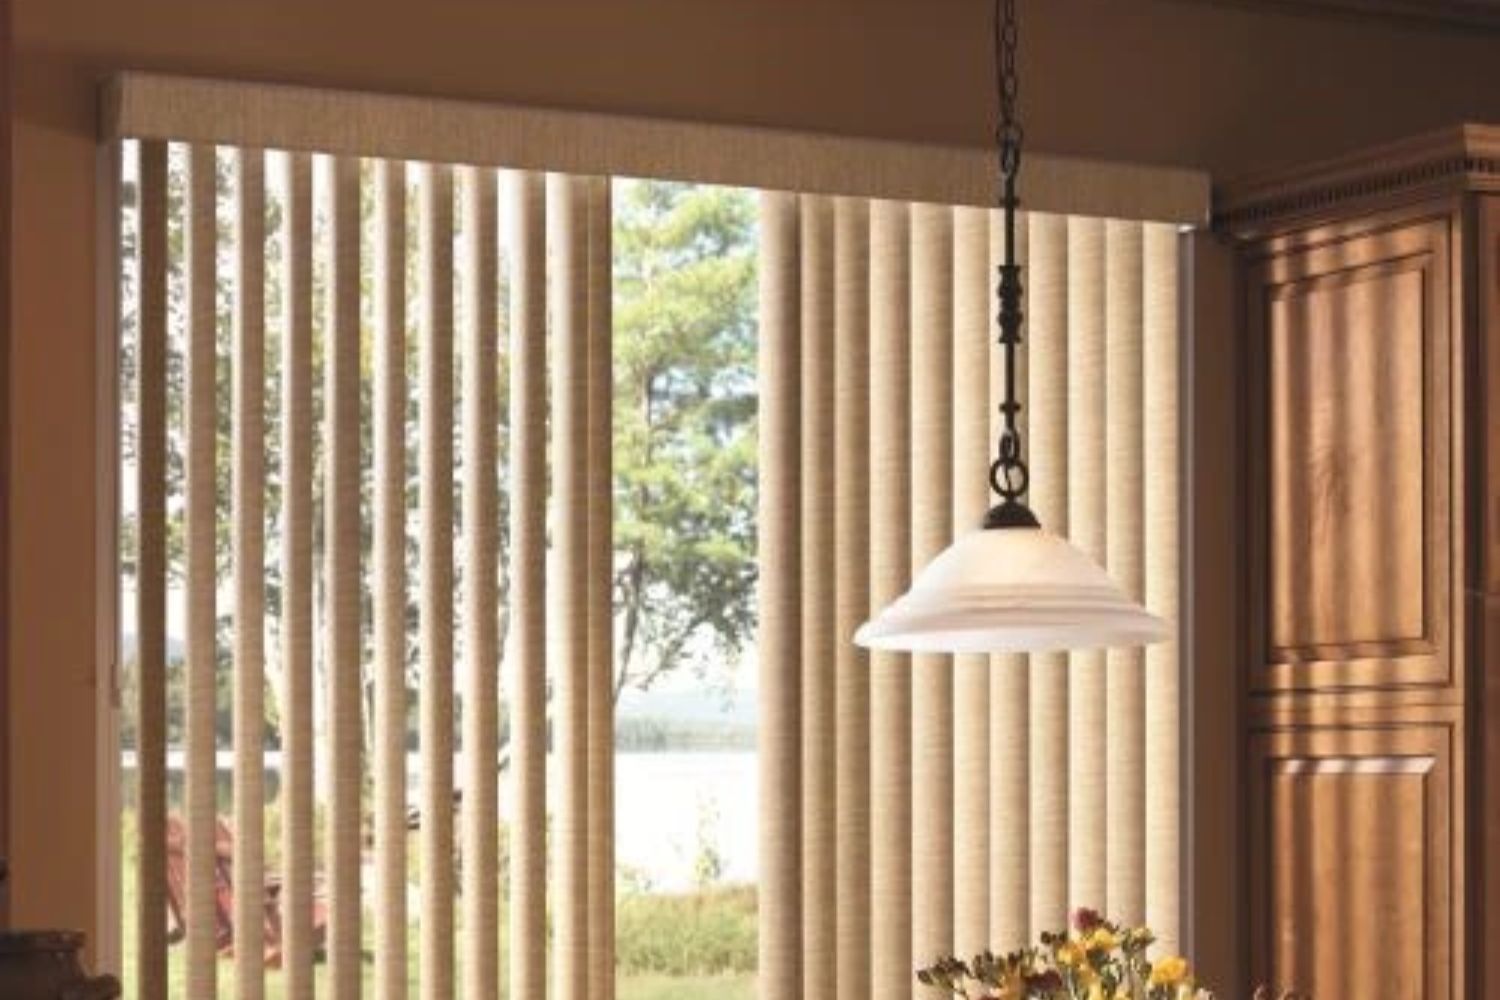 The Best Window Treatment for Sliding Doors Options: Bali Fabric Vertical Blinds